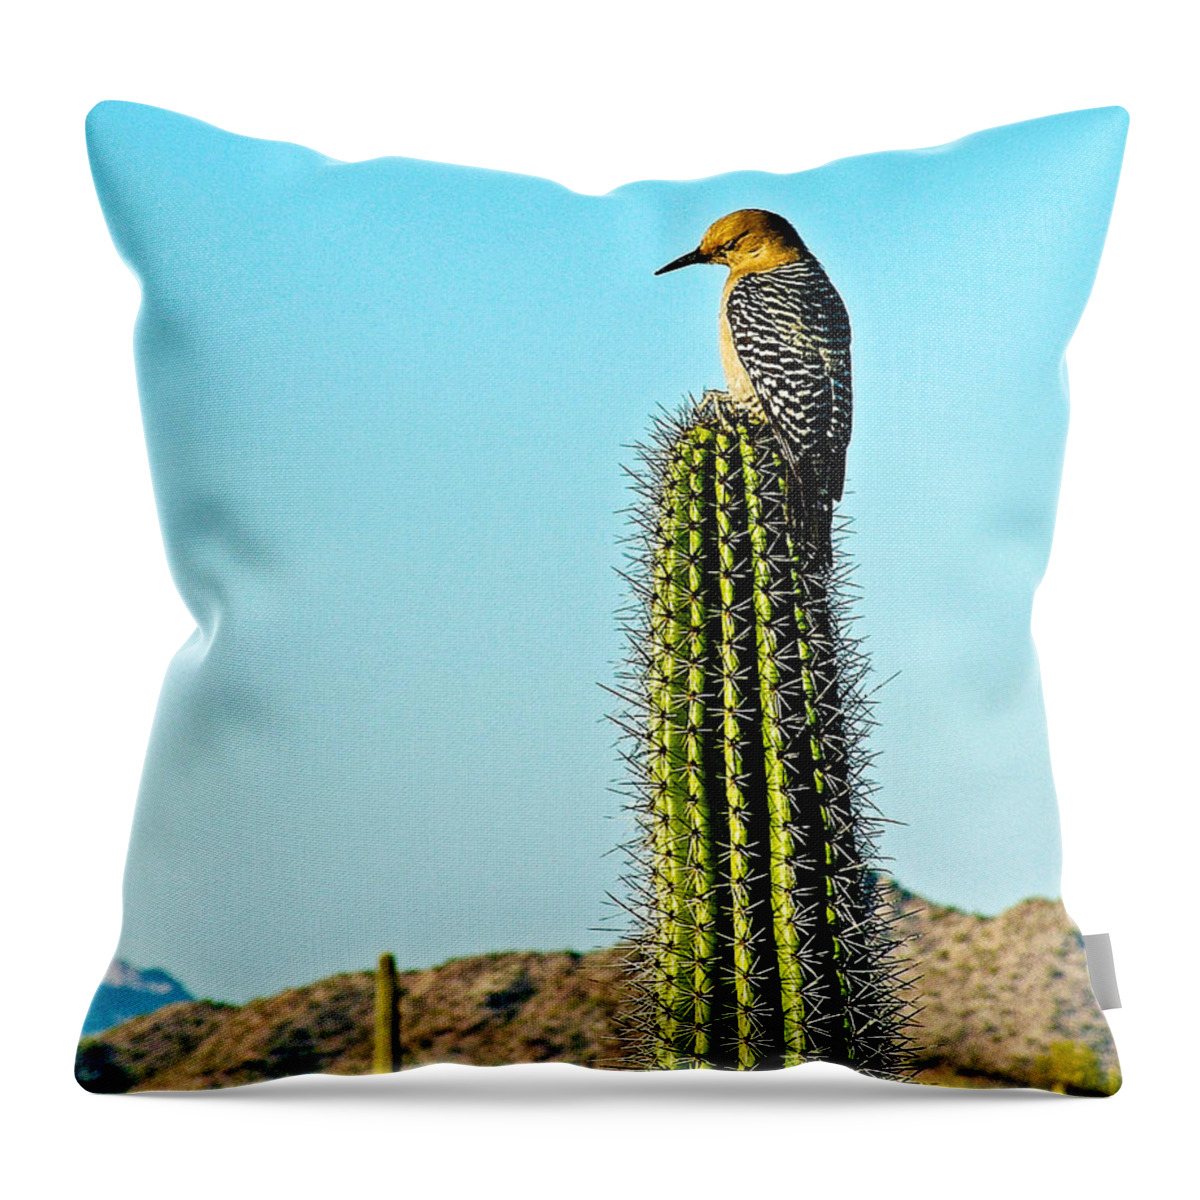 Gila Woodpecker On Saguaro Cactus In Organ Pipe Cactus National Monument Throw Pillow featuring the photograph Gila Woodpecker on Saguaro in Organ Pipe Cactus National Monument-Arizona by Ruth Hager